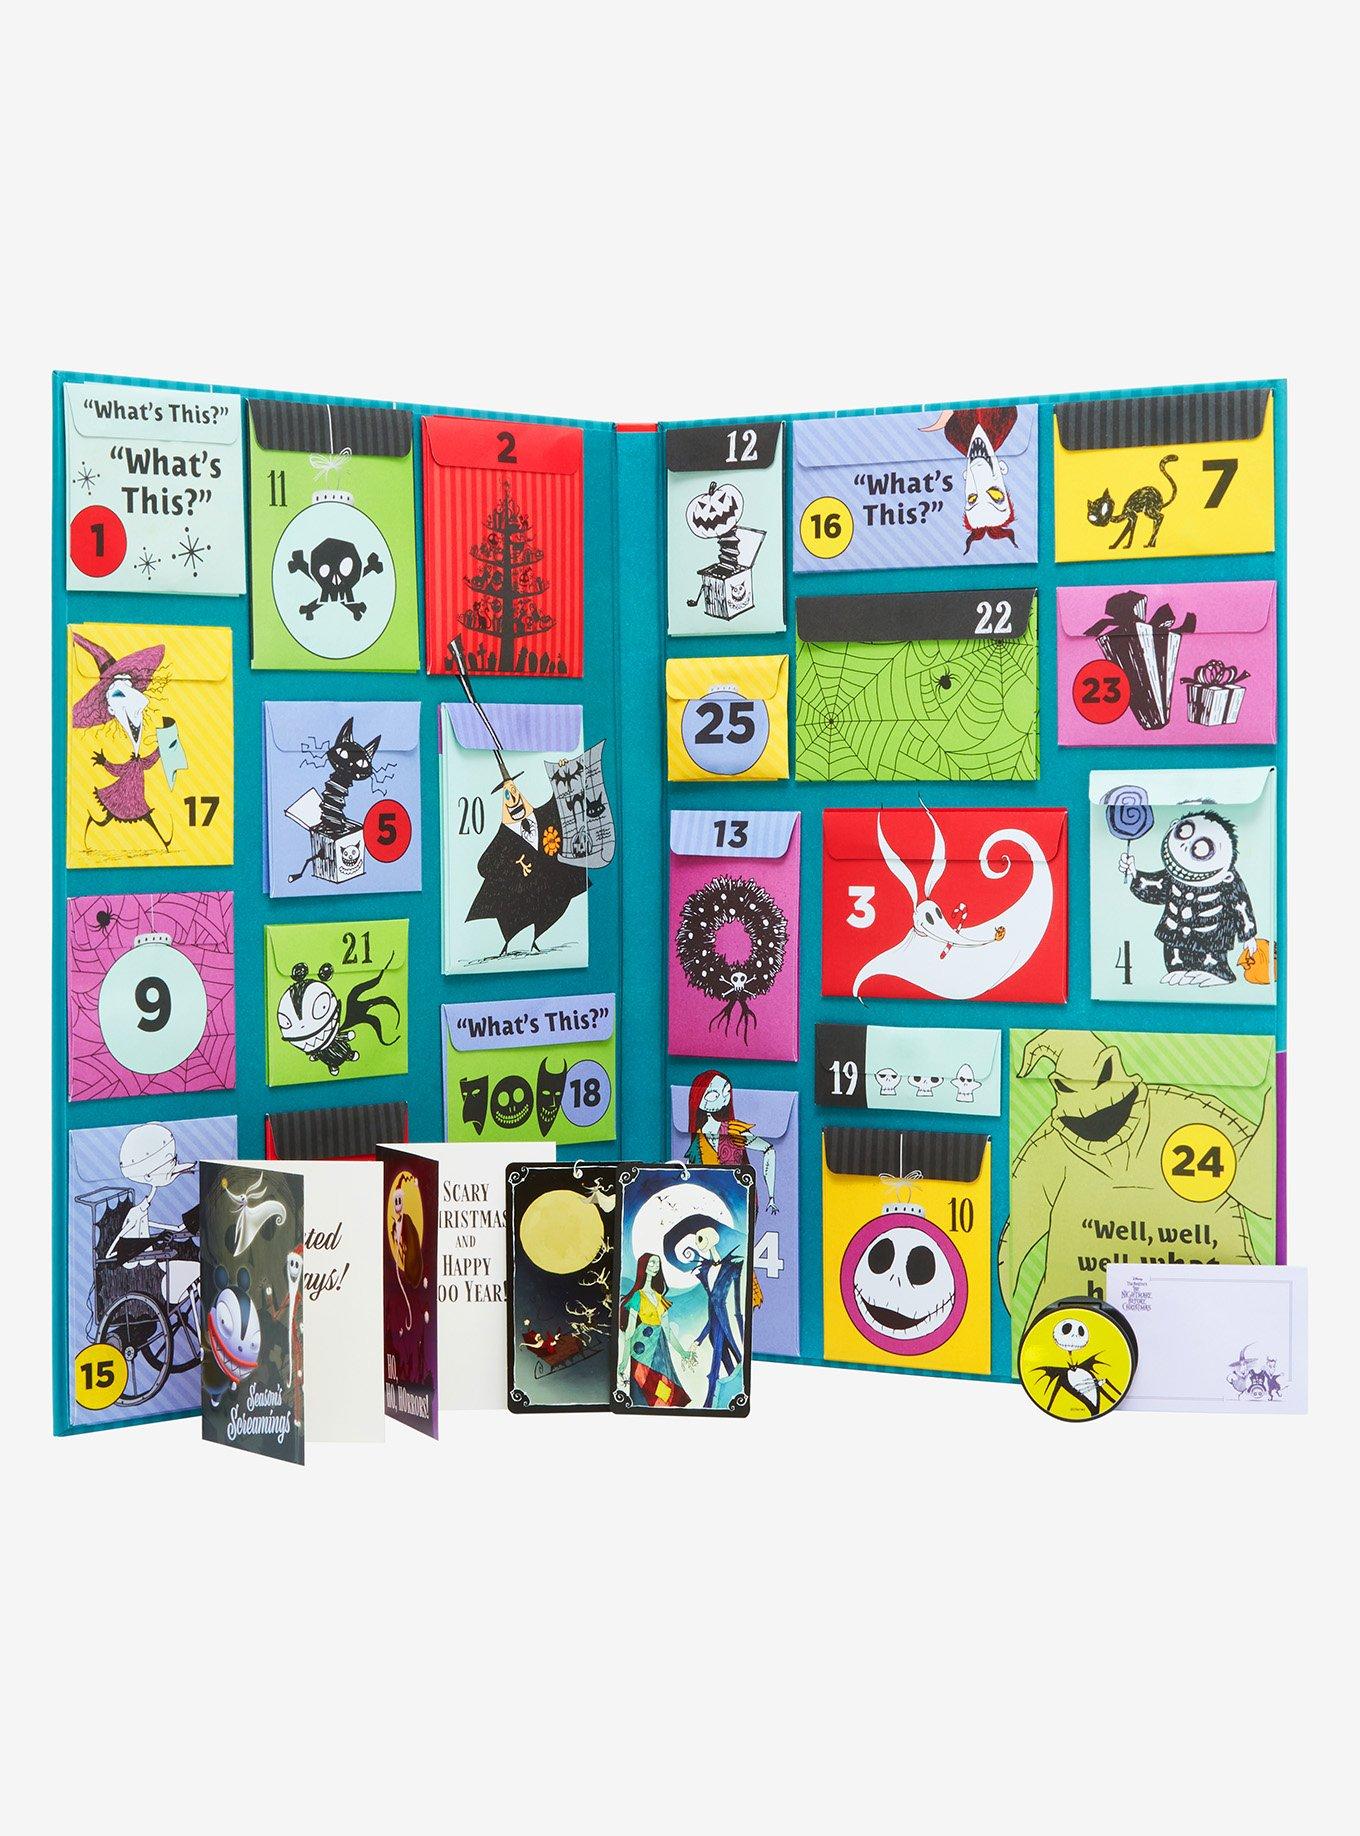 The Nightmare Before Christmas: Official Advent Calendar: Ghoulish Delights